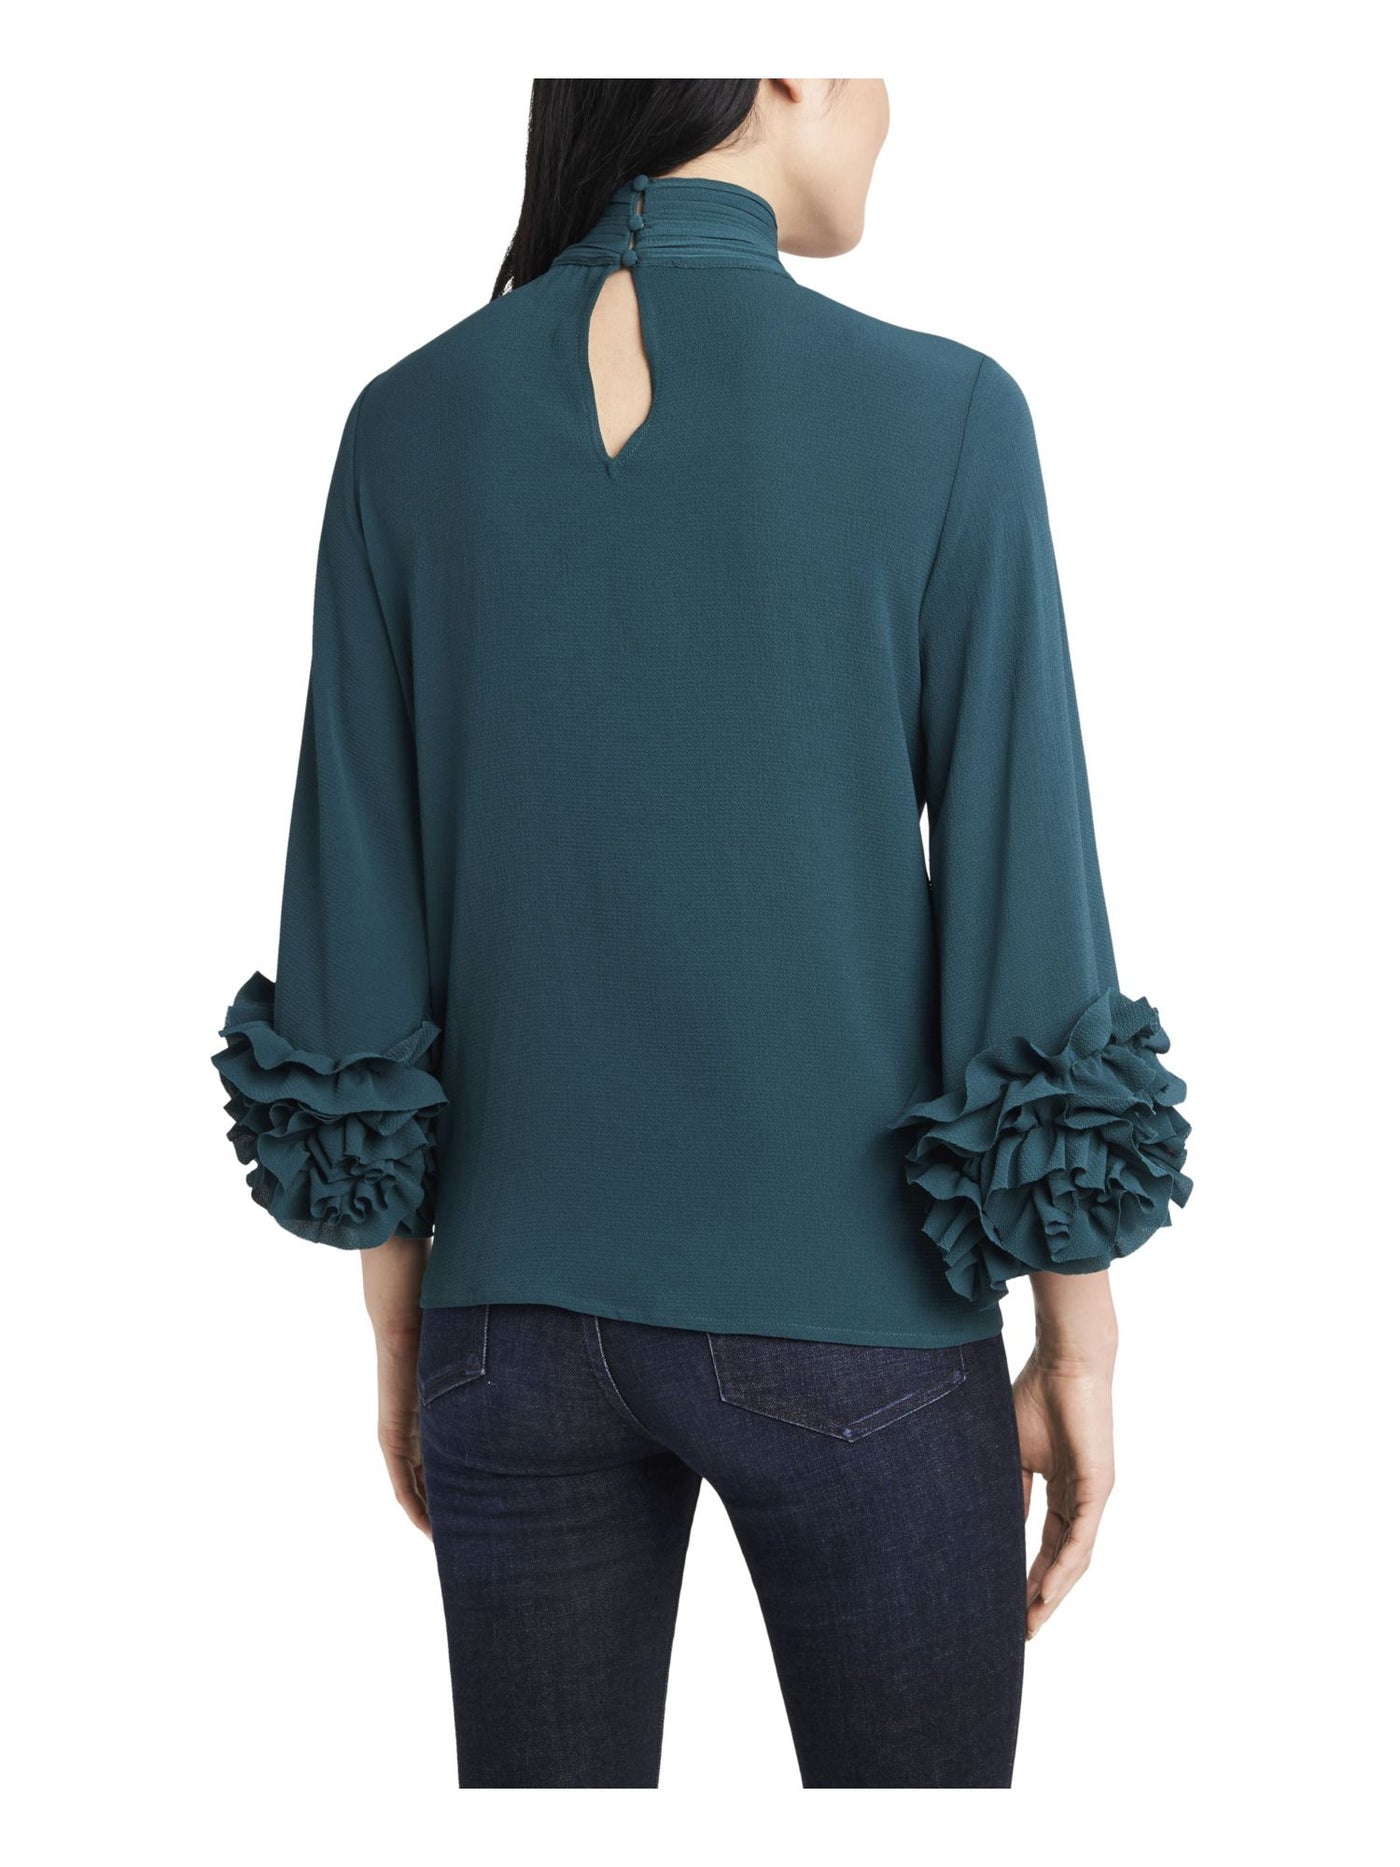 VINCE CAMUTO Womens Green Ruffled Gathered Keyhole Back 3/4 Sleeve Mock Neck Wear To Work Top M